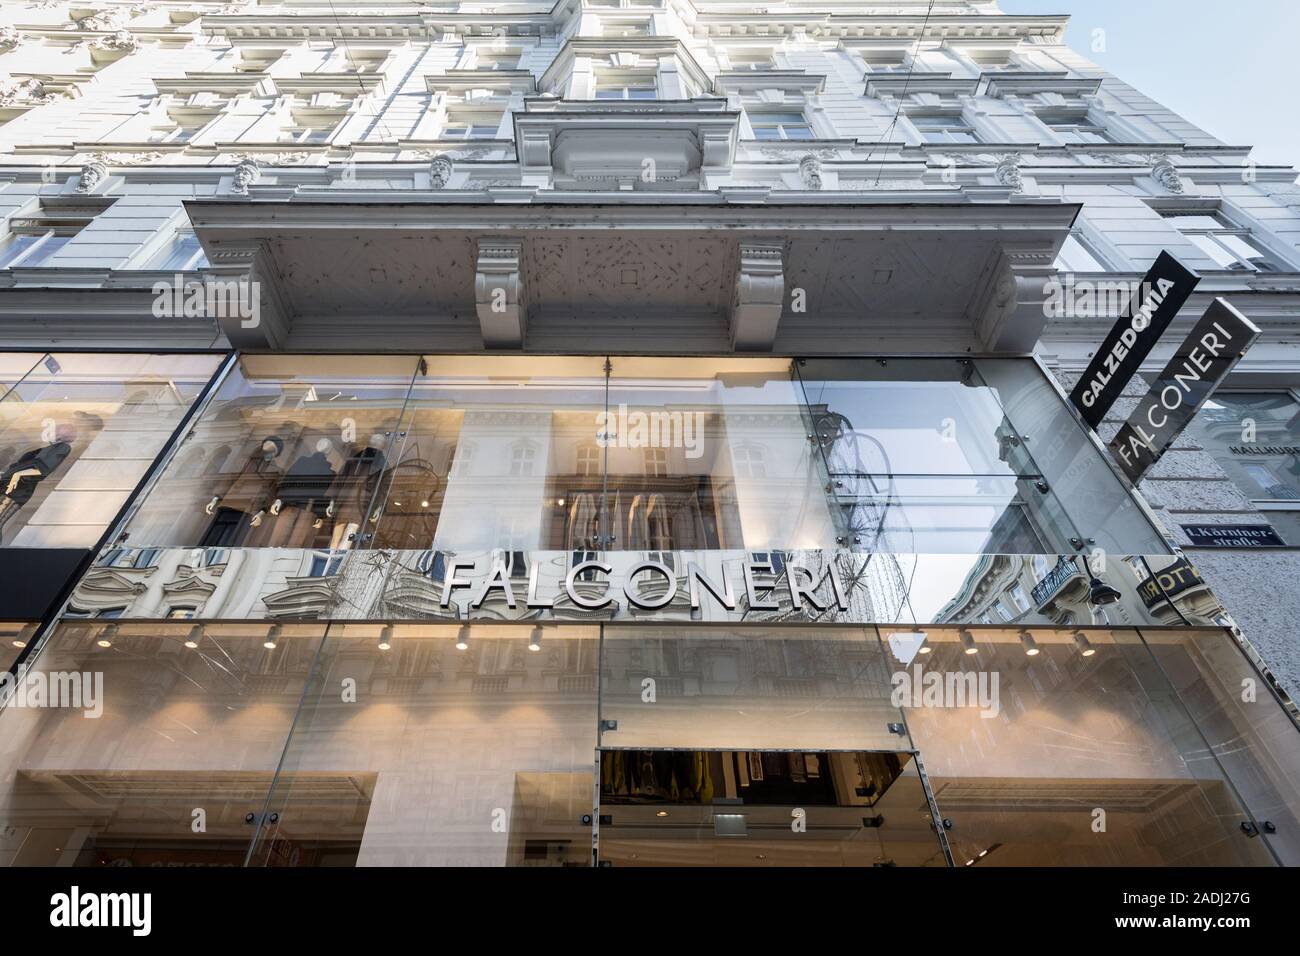 VIENNA, AUSTRIA - NOVEMBER 6, 2019: Falconerie logo in front of their boutique for Vienna. Part of Calezdonia group, Falconeri is an italian fashion d Stock Photo